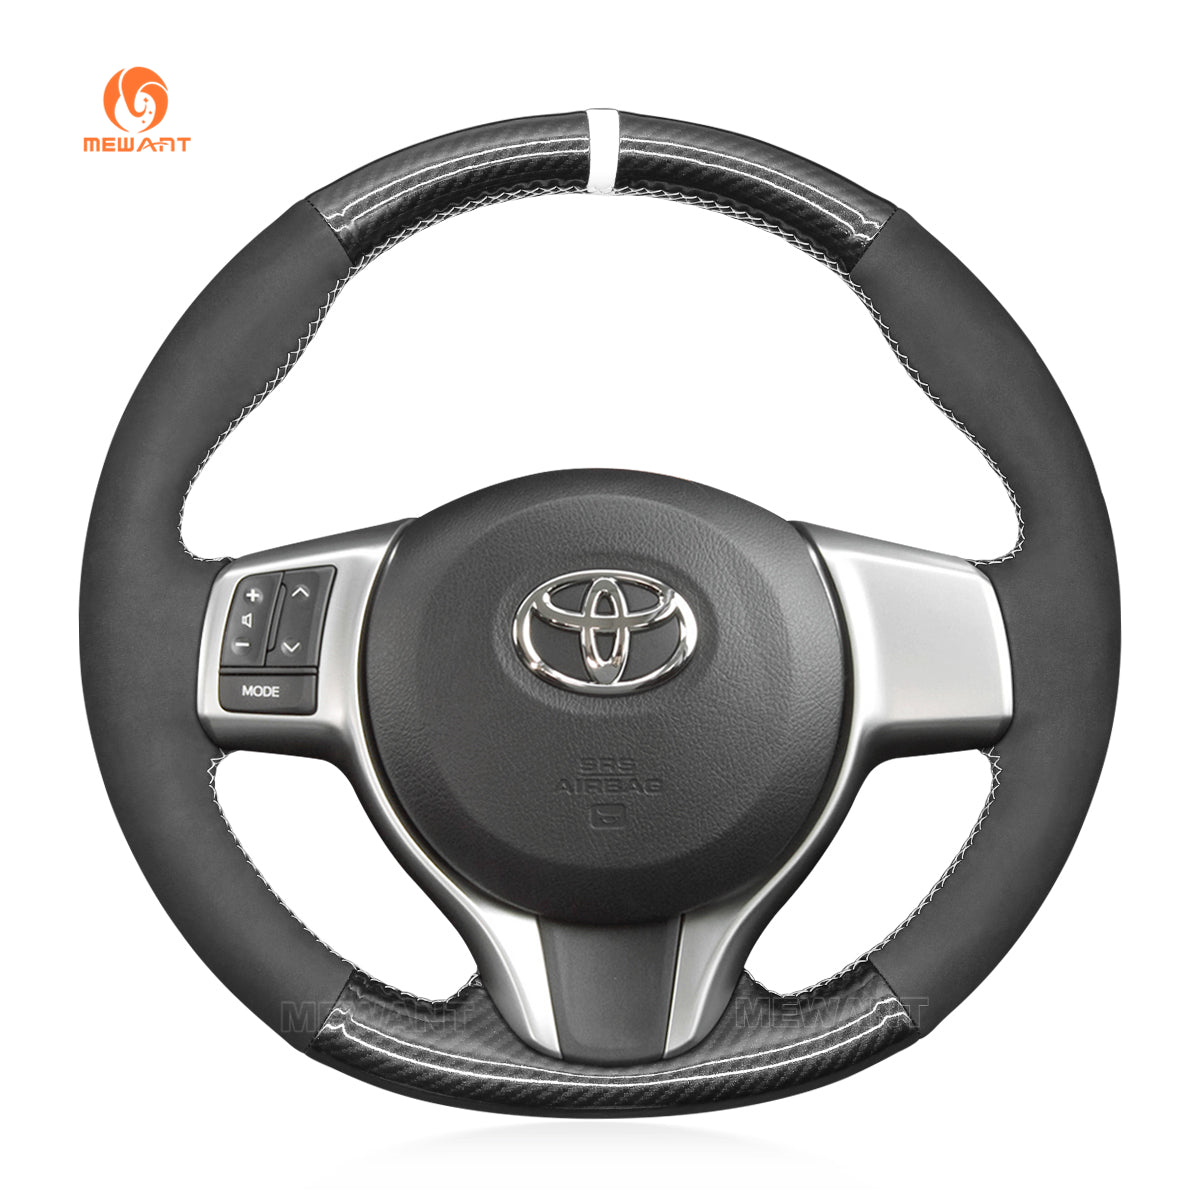 MEWANT Hand Stitch Black Carbon Fiber Suede Car Steering Wheel Cover for Toyota Yaris 2012-2020 / Ractis 2010-2015